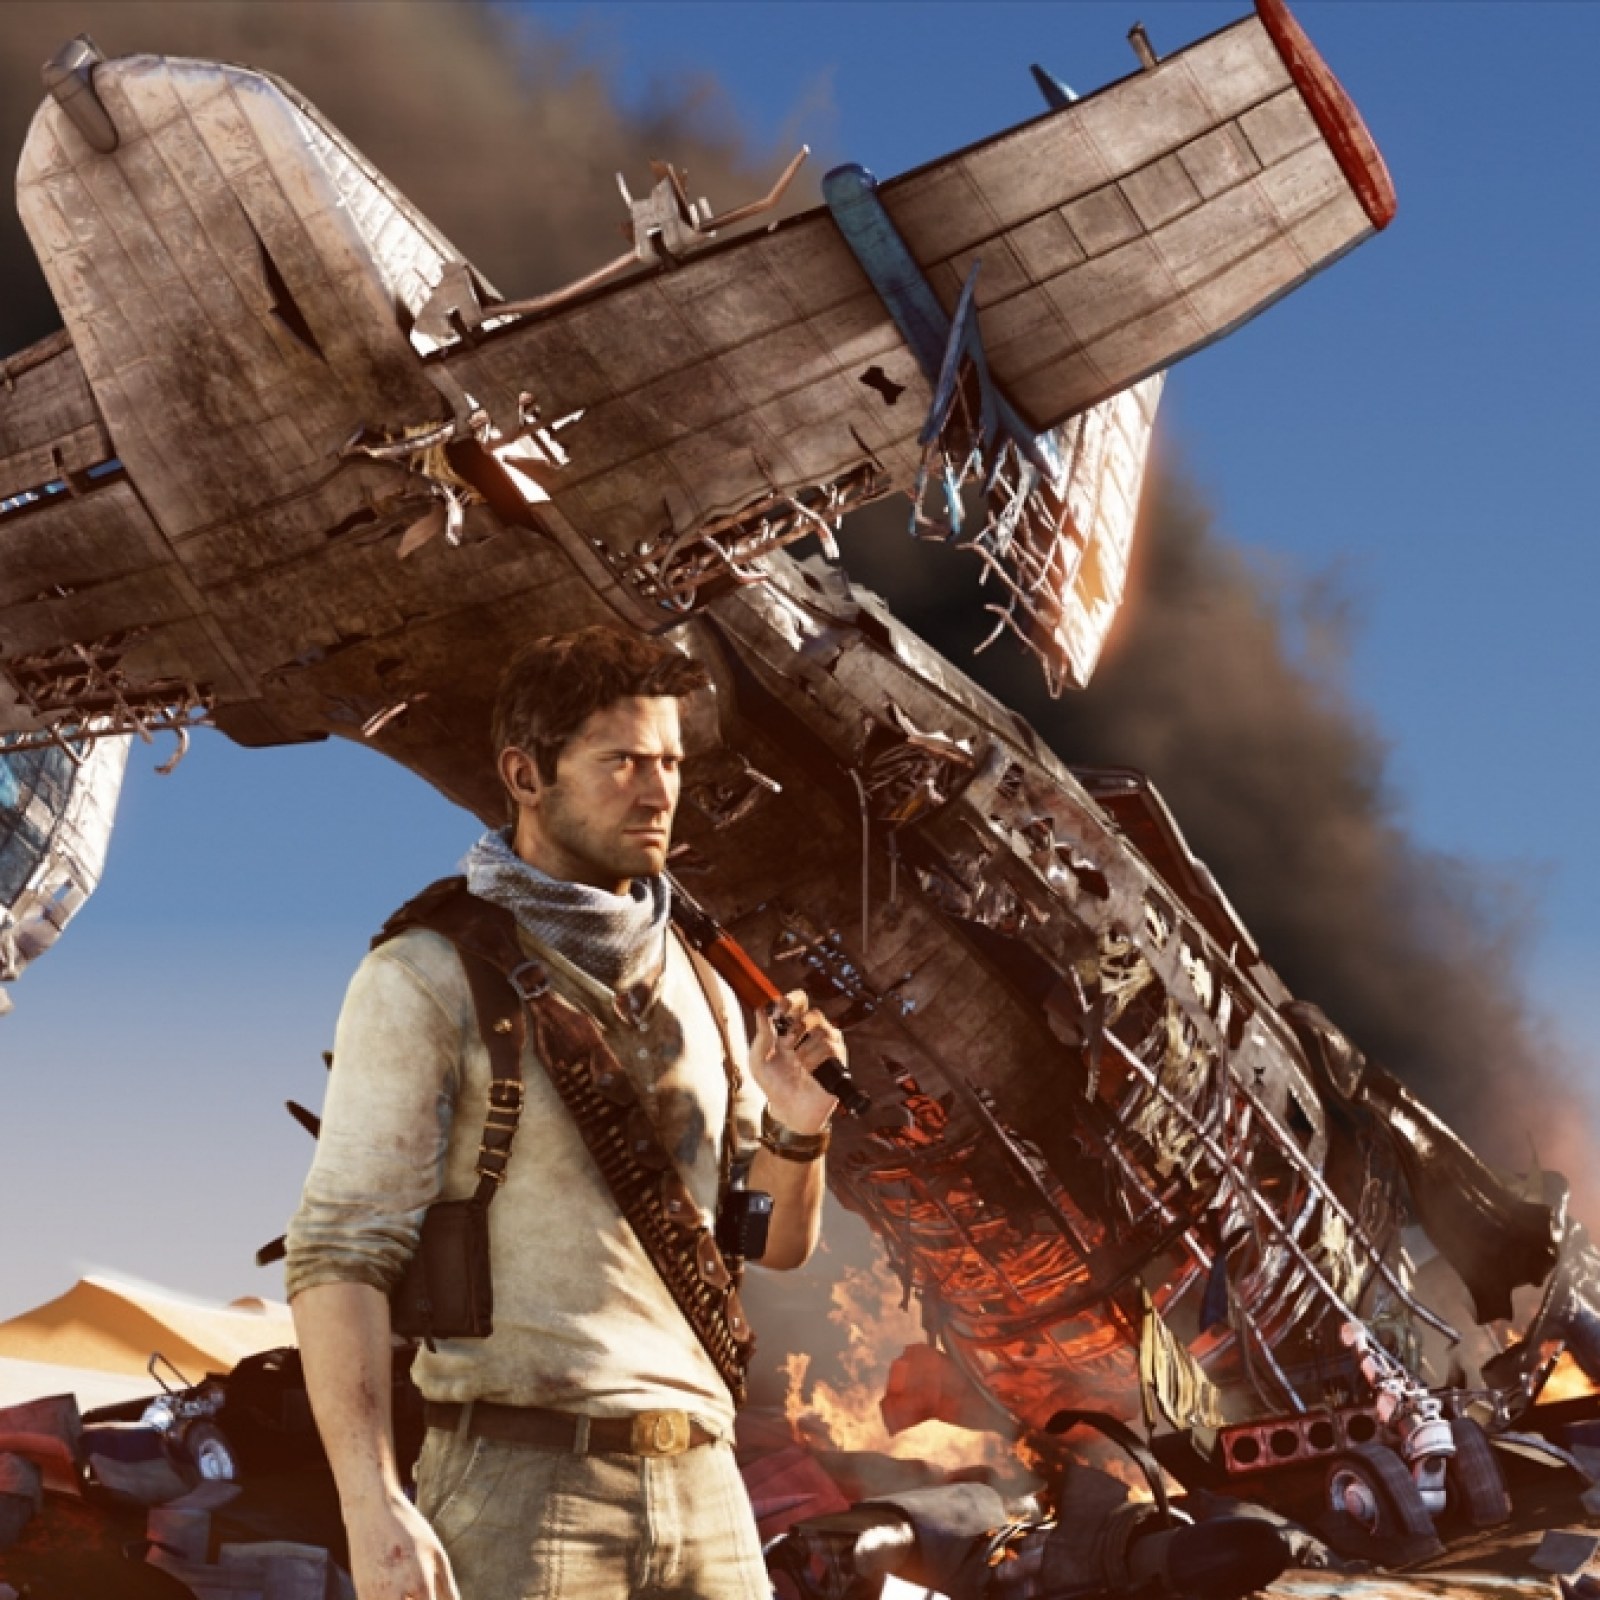 How Naughty Dog deconstructed Nathan Drake in Uncharted 3: Drake's